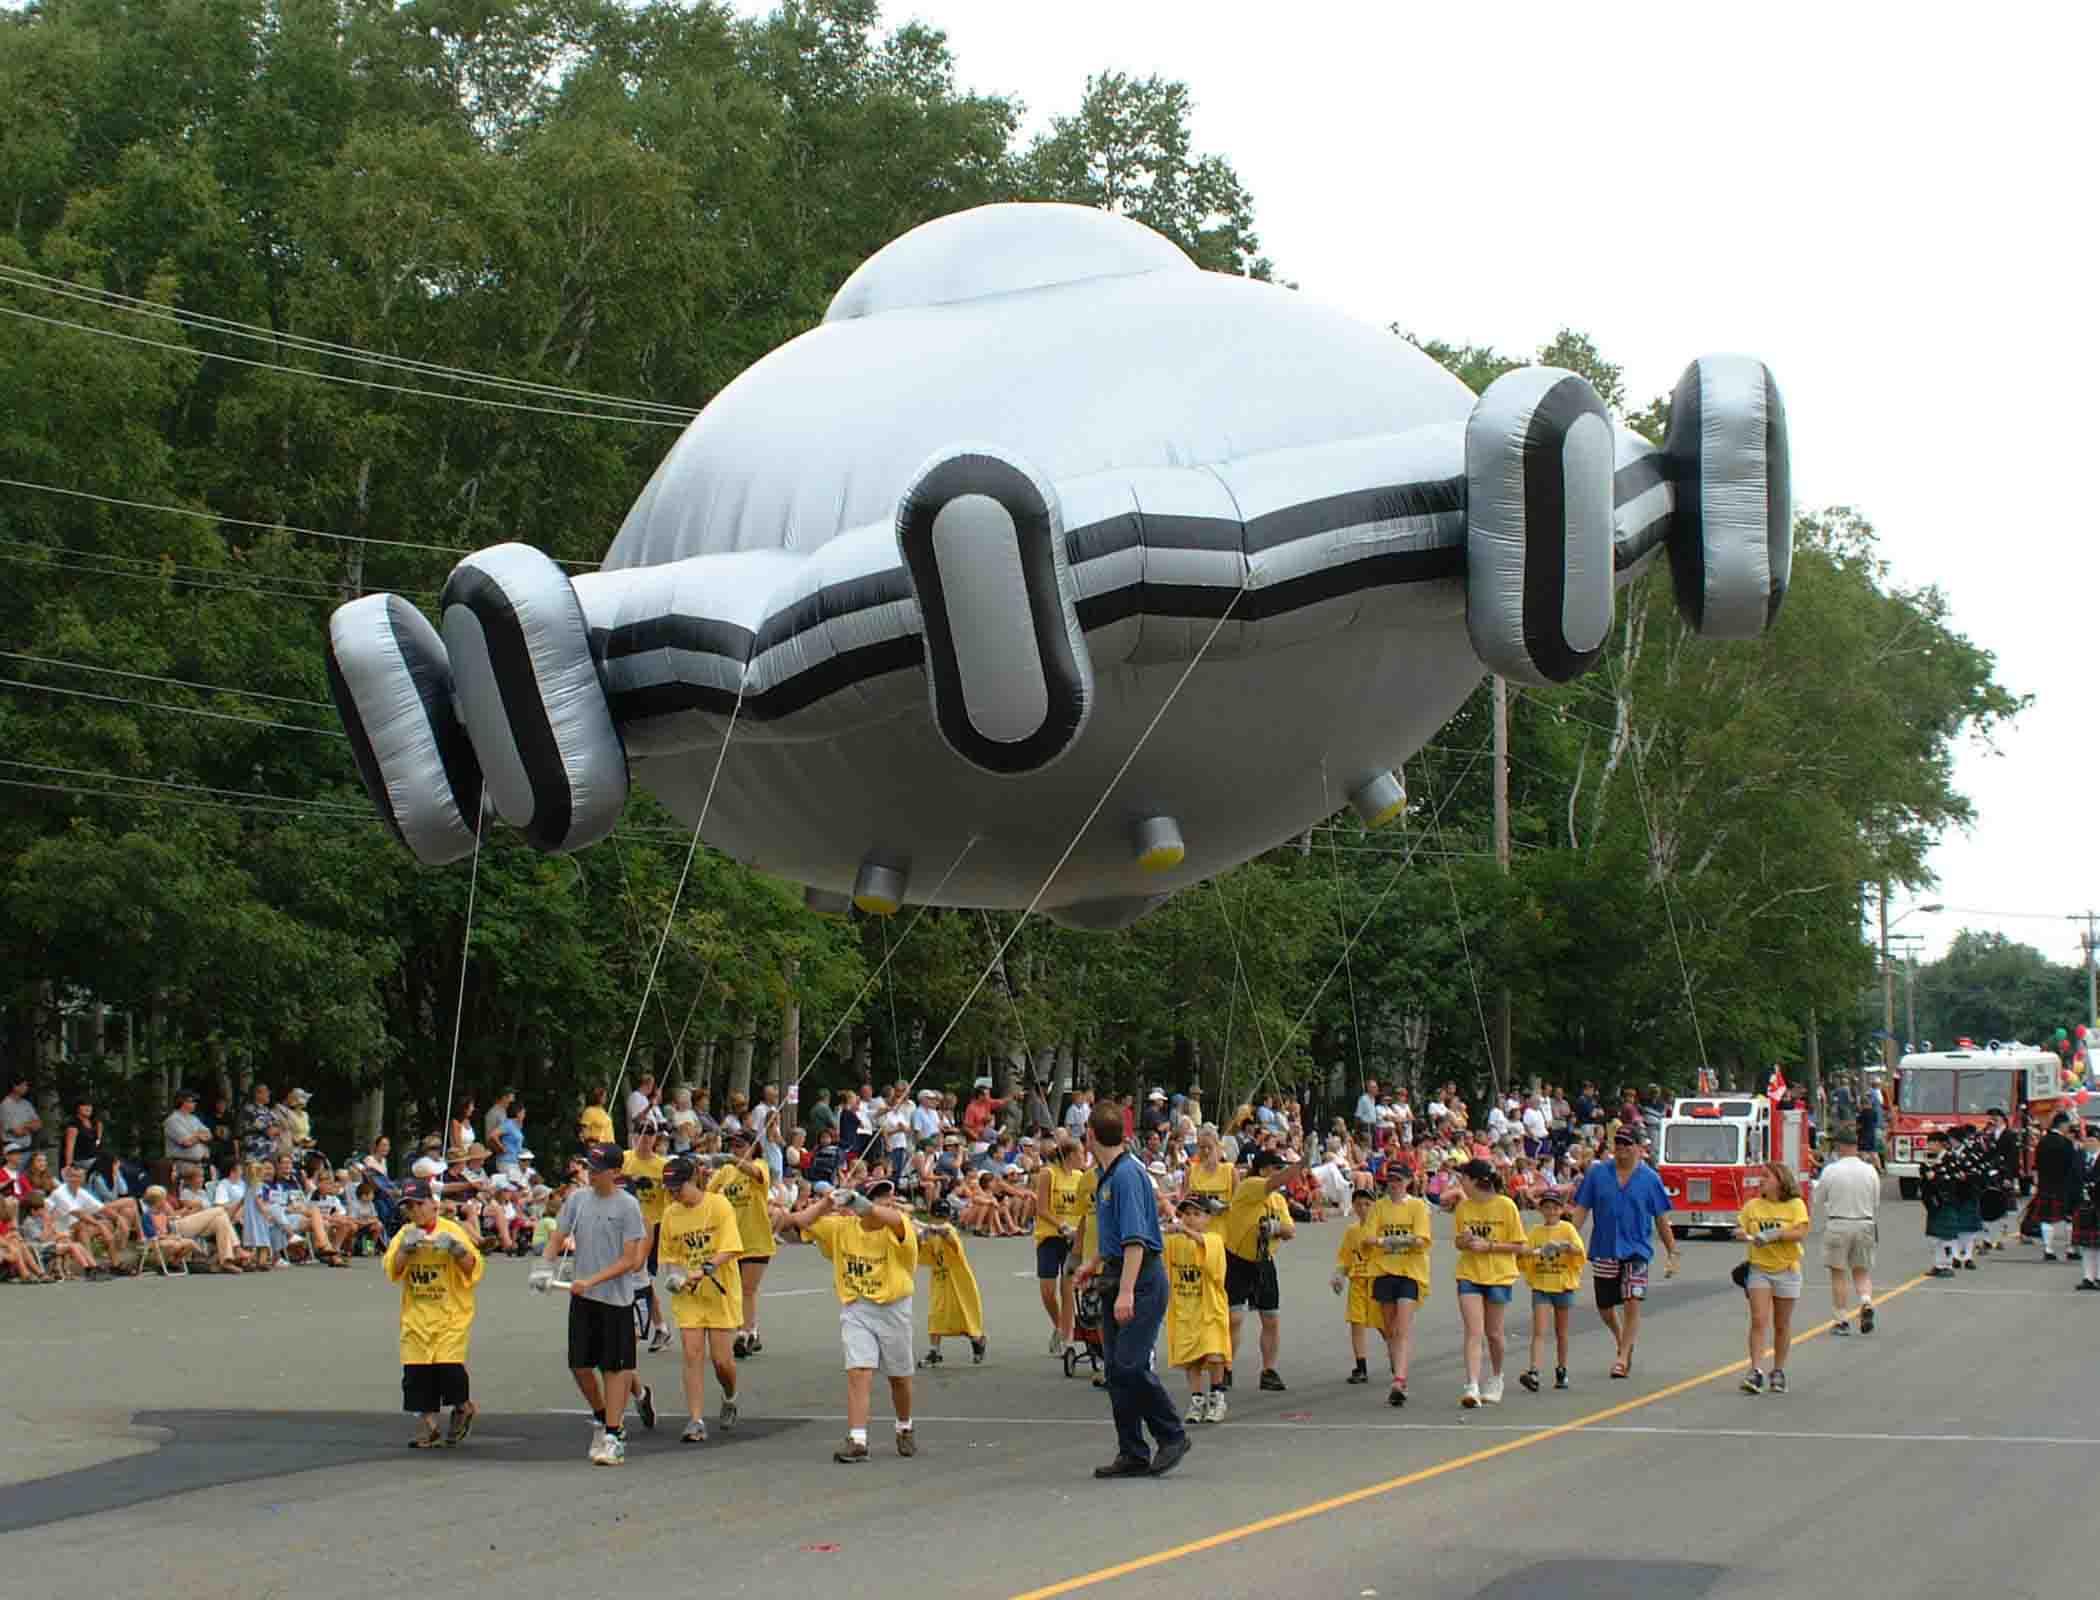 There's a real UFO festival in Roswell, NM – because of course there is